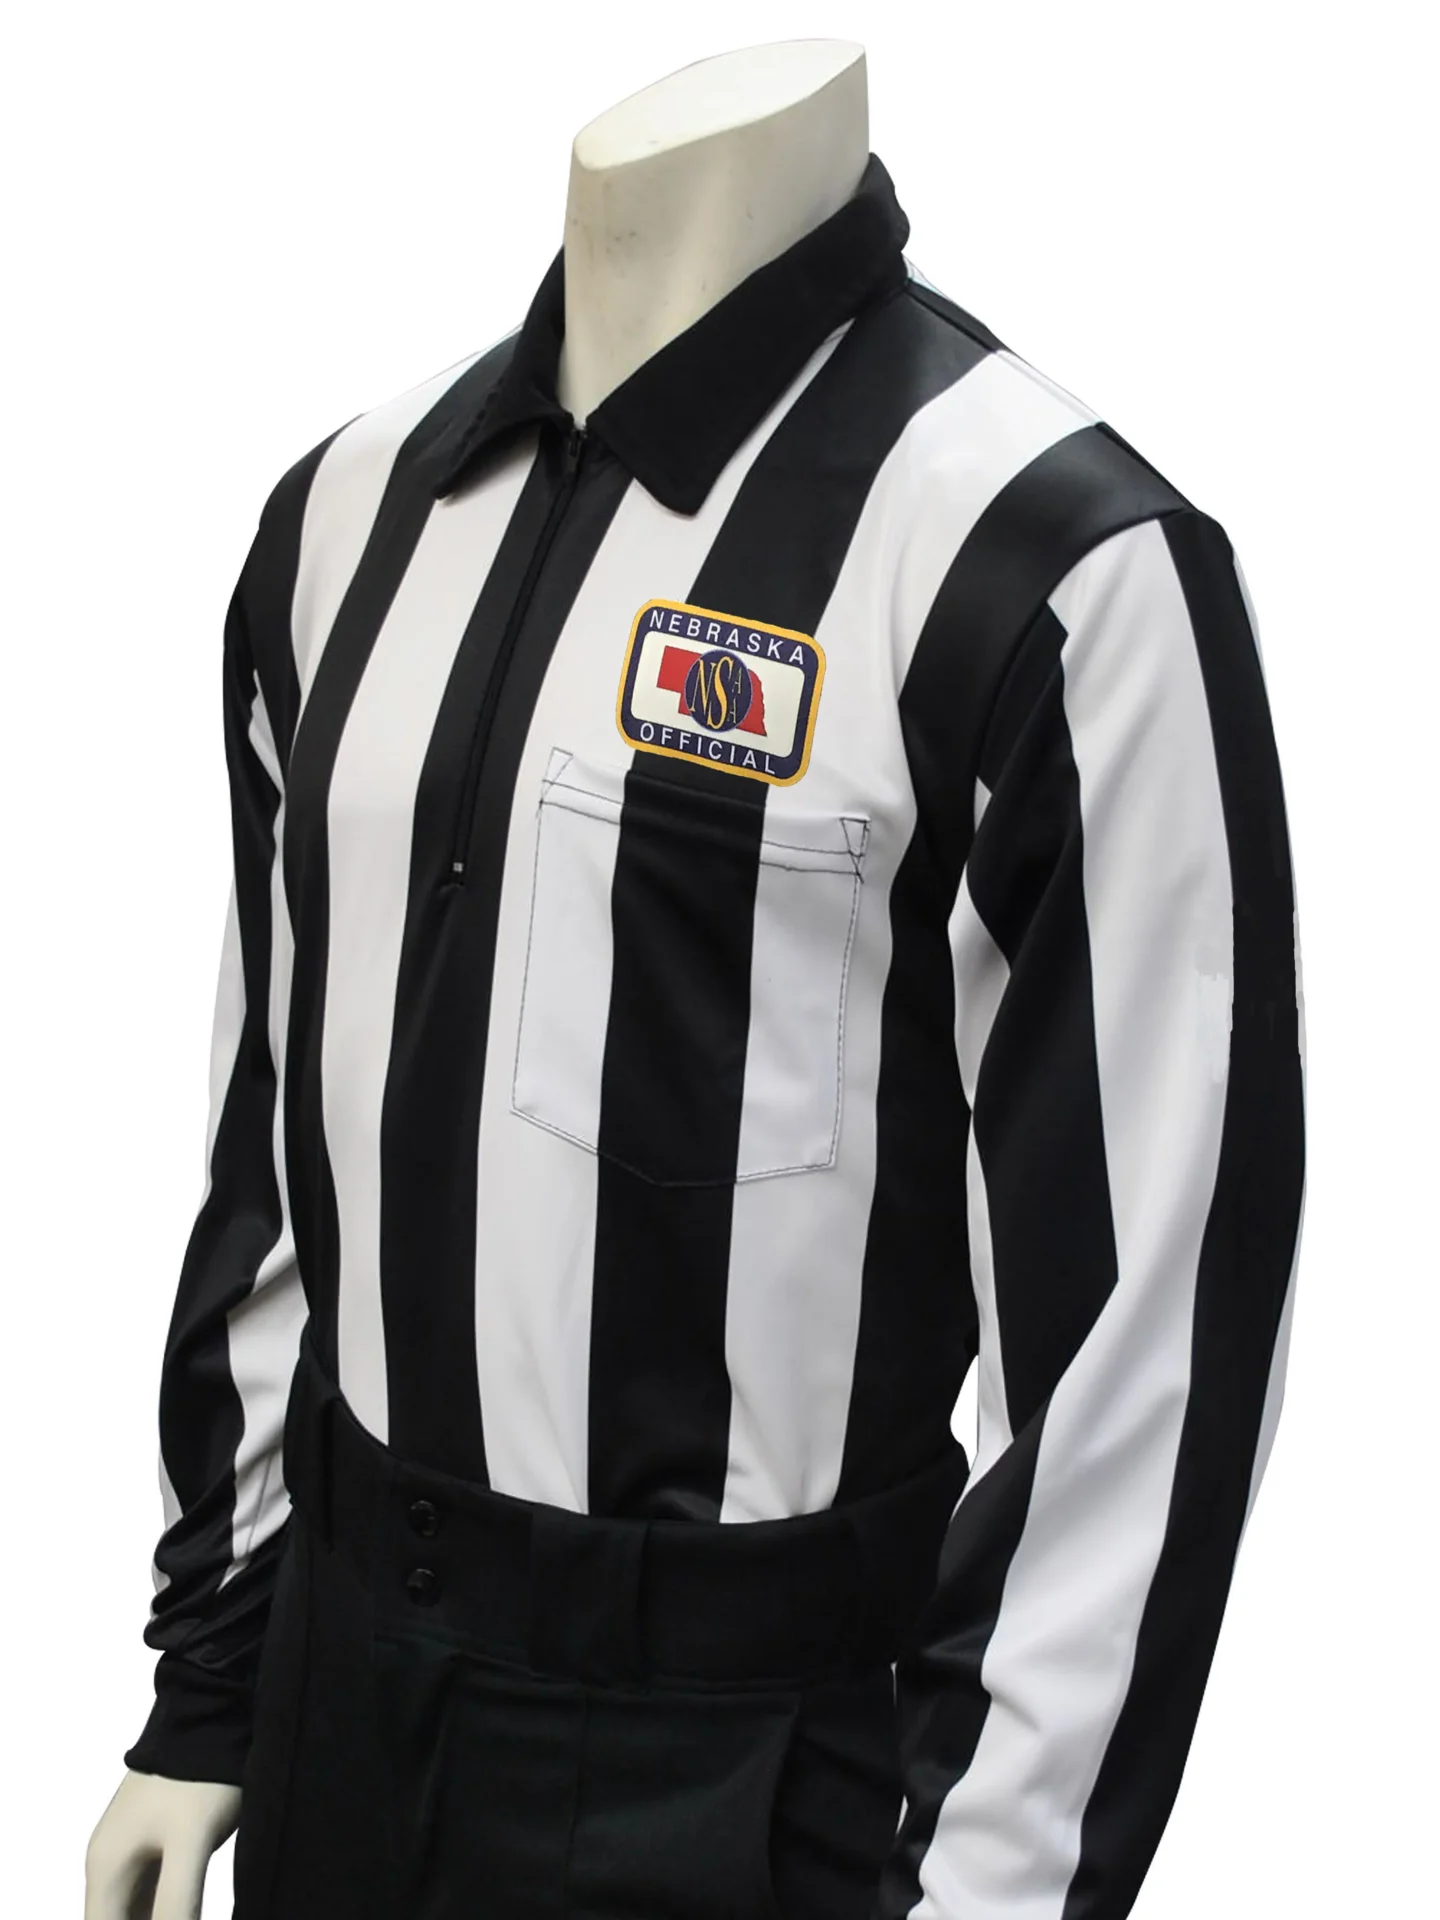 A referee shirt with the name of the game on it.